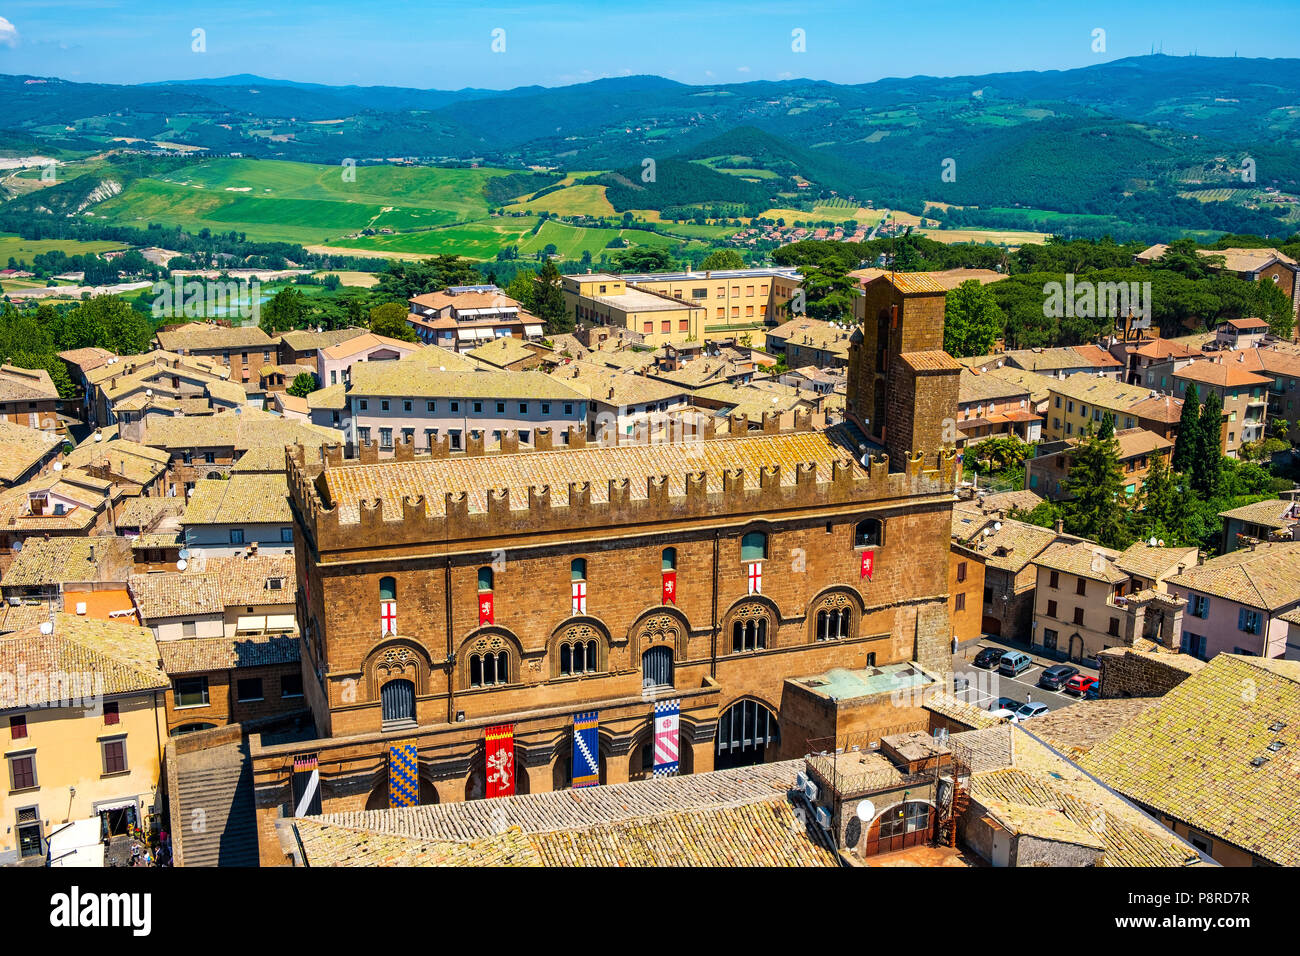 Orvieto, Umbria / Italy - 2018/05/26: Panoramic view of Orvieto old town and Umbria region with Piazza Vivaria square and Palazzo del Popolo palace Stock Photo